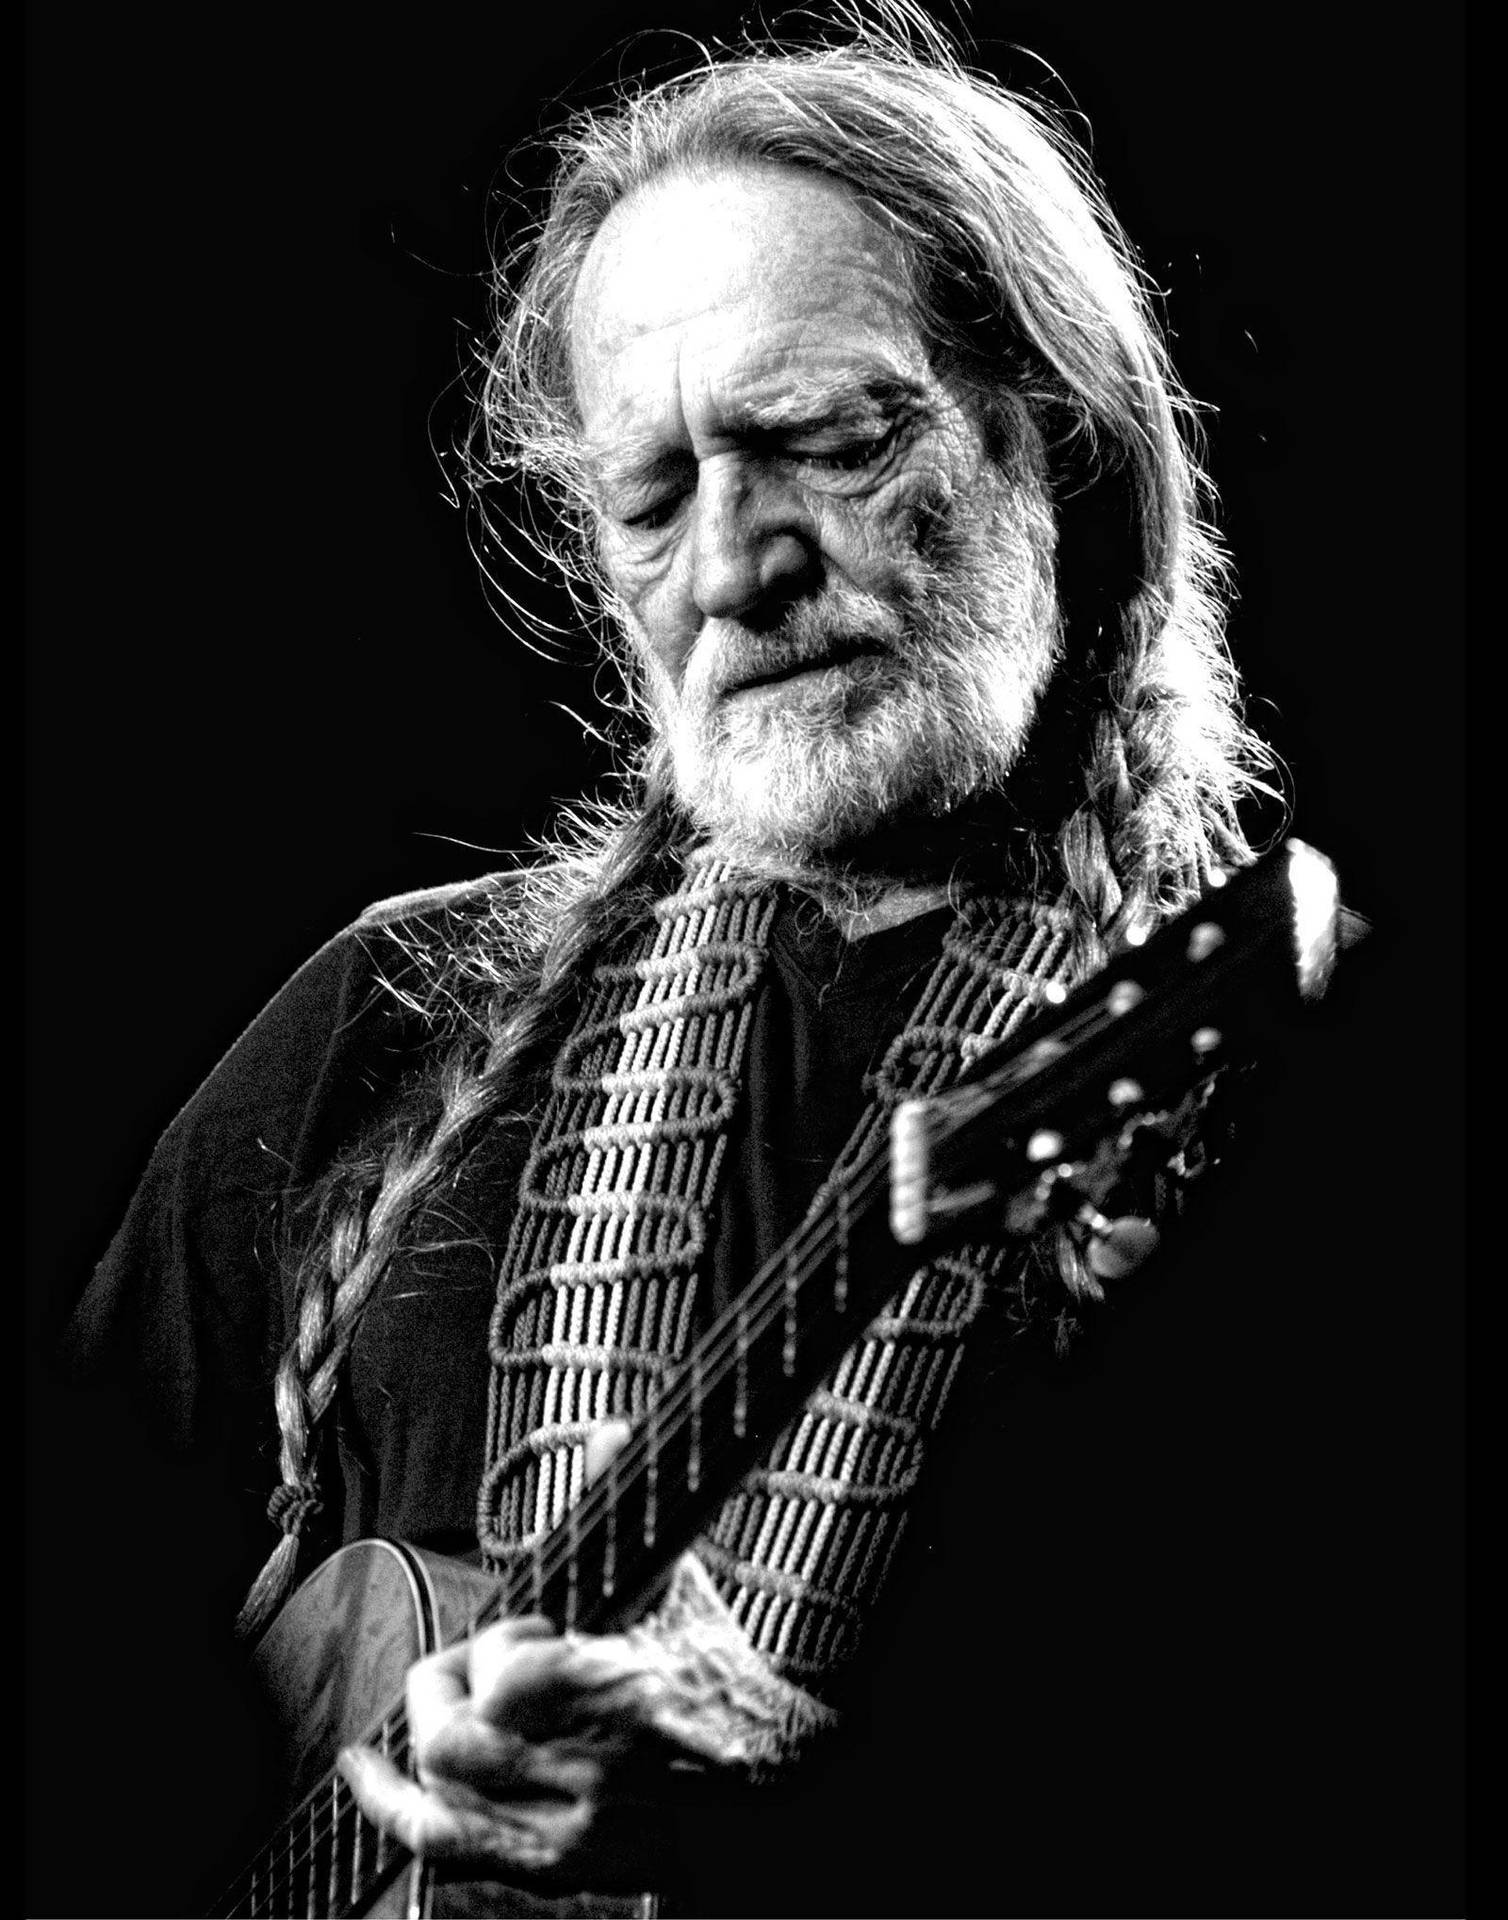 Iconic Country Music Legend Willie Nelson in Monochrome Wallpaper